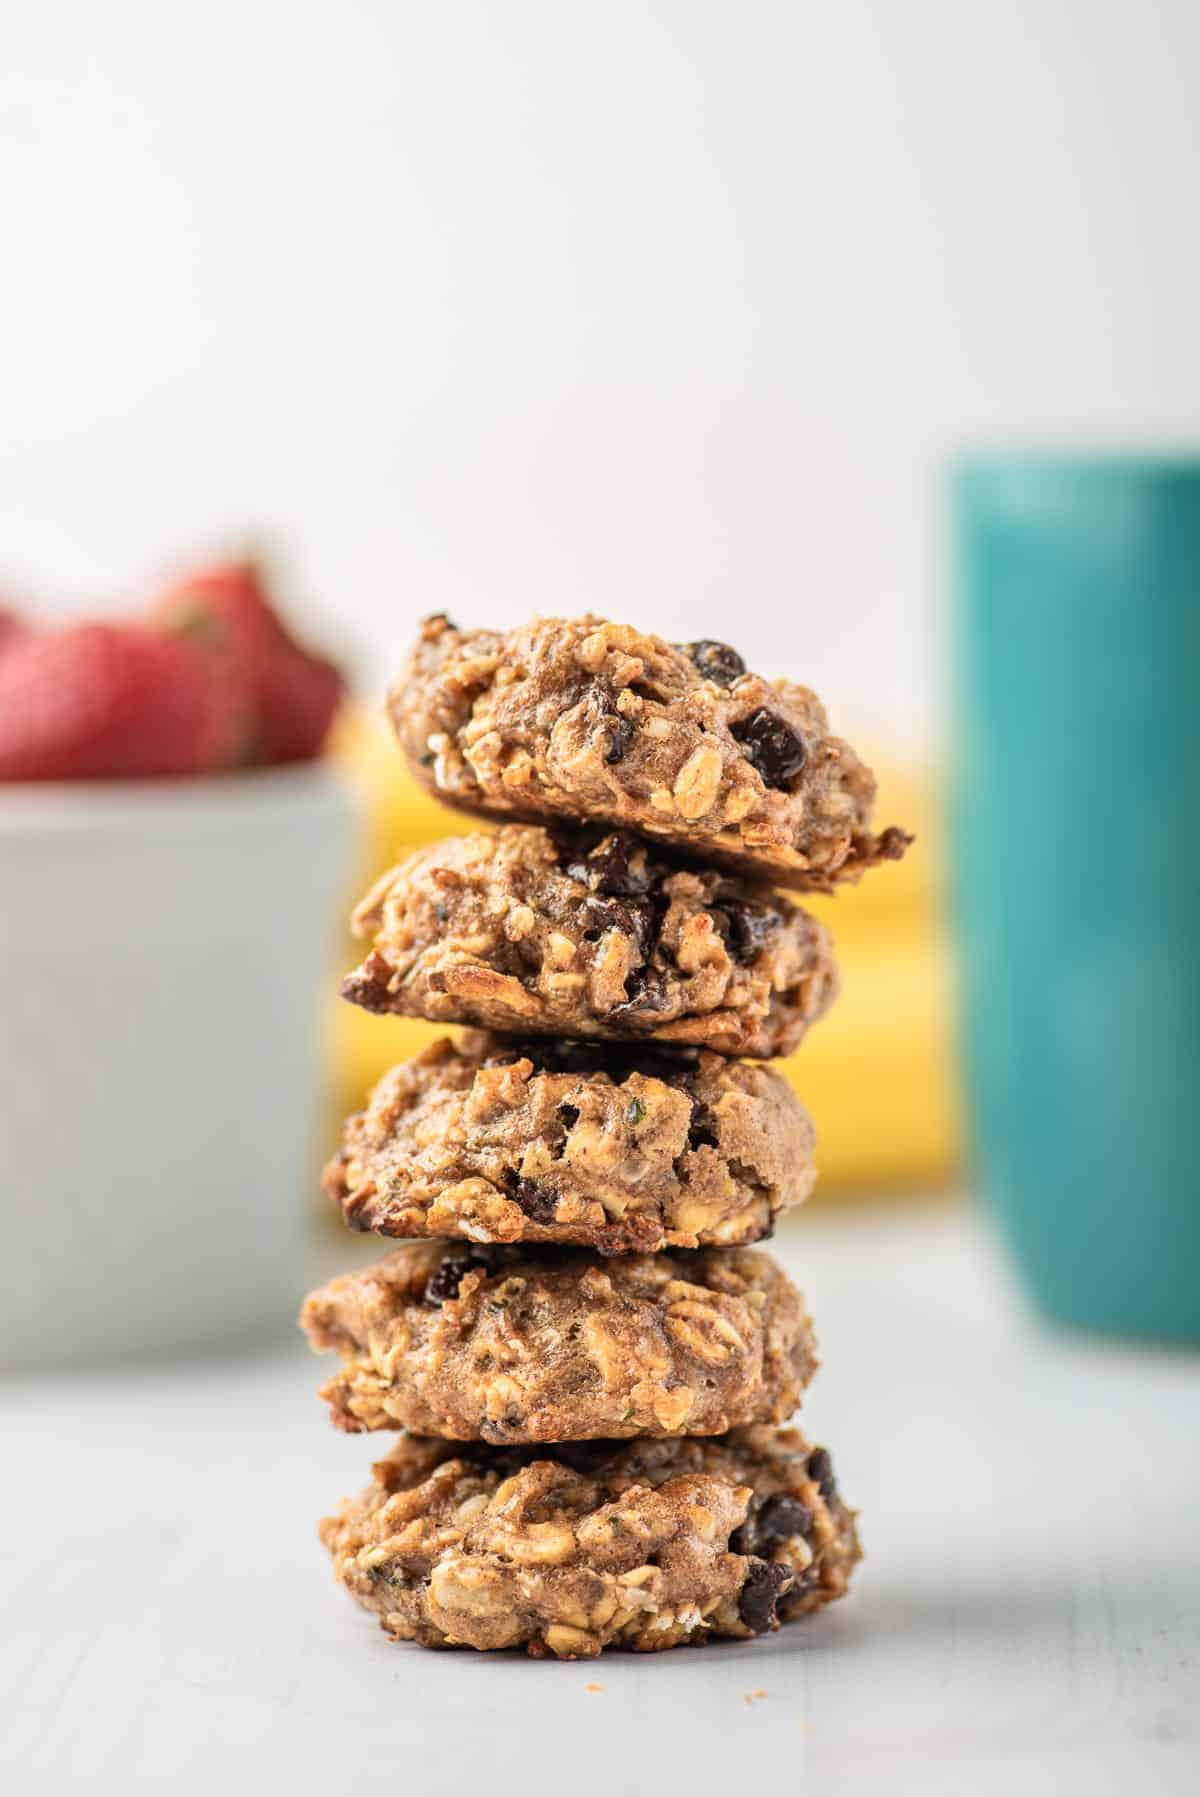 Stack of cookies with oats and chocolate chips in them.